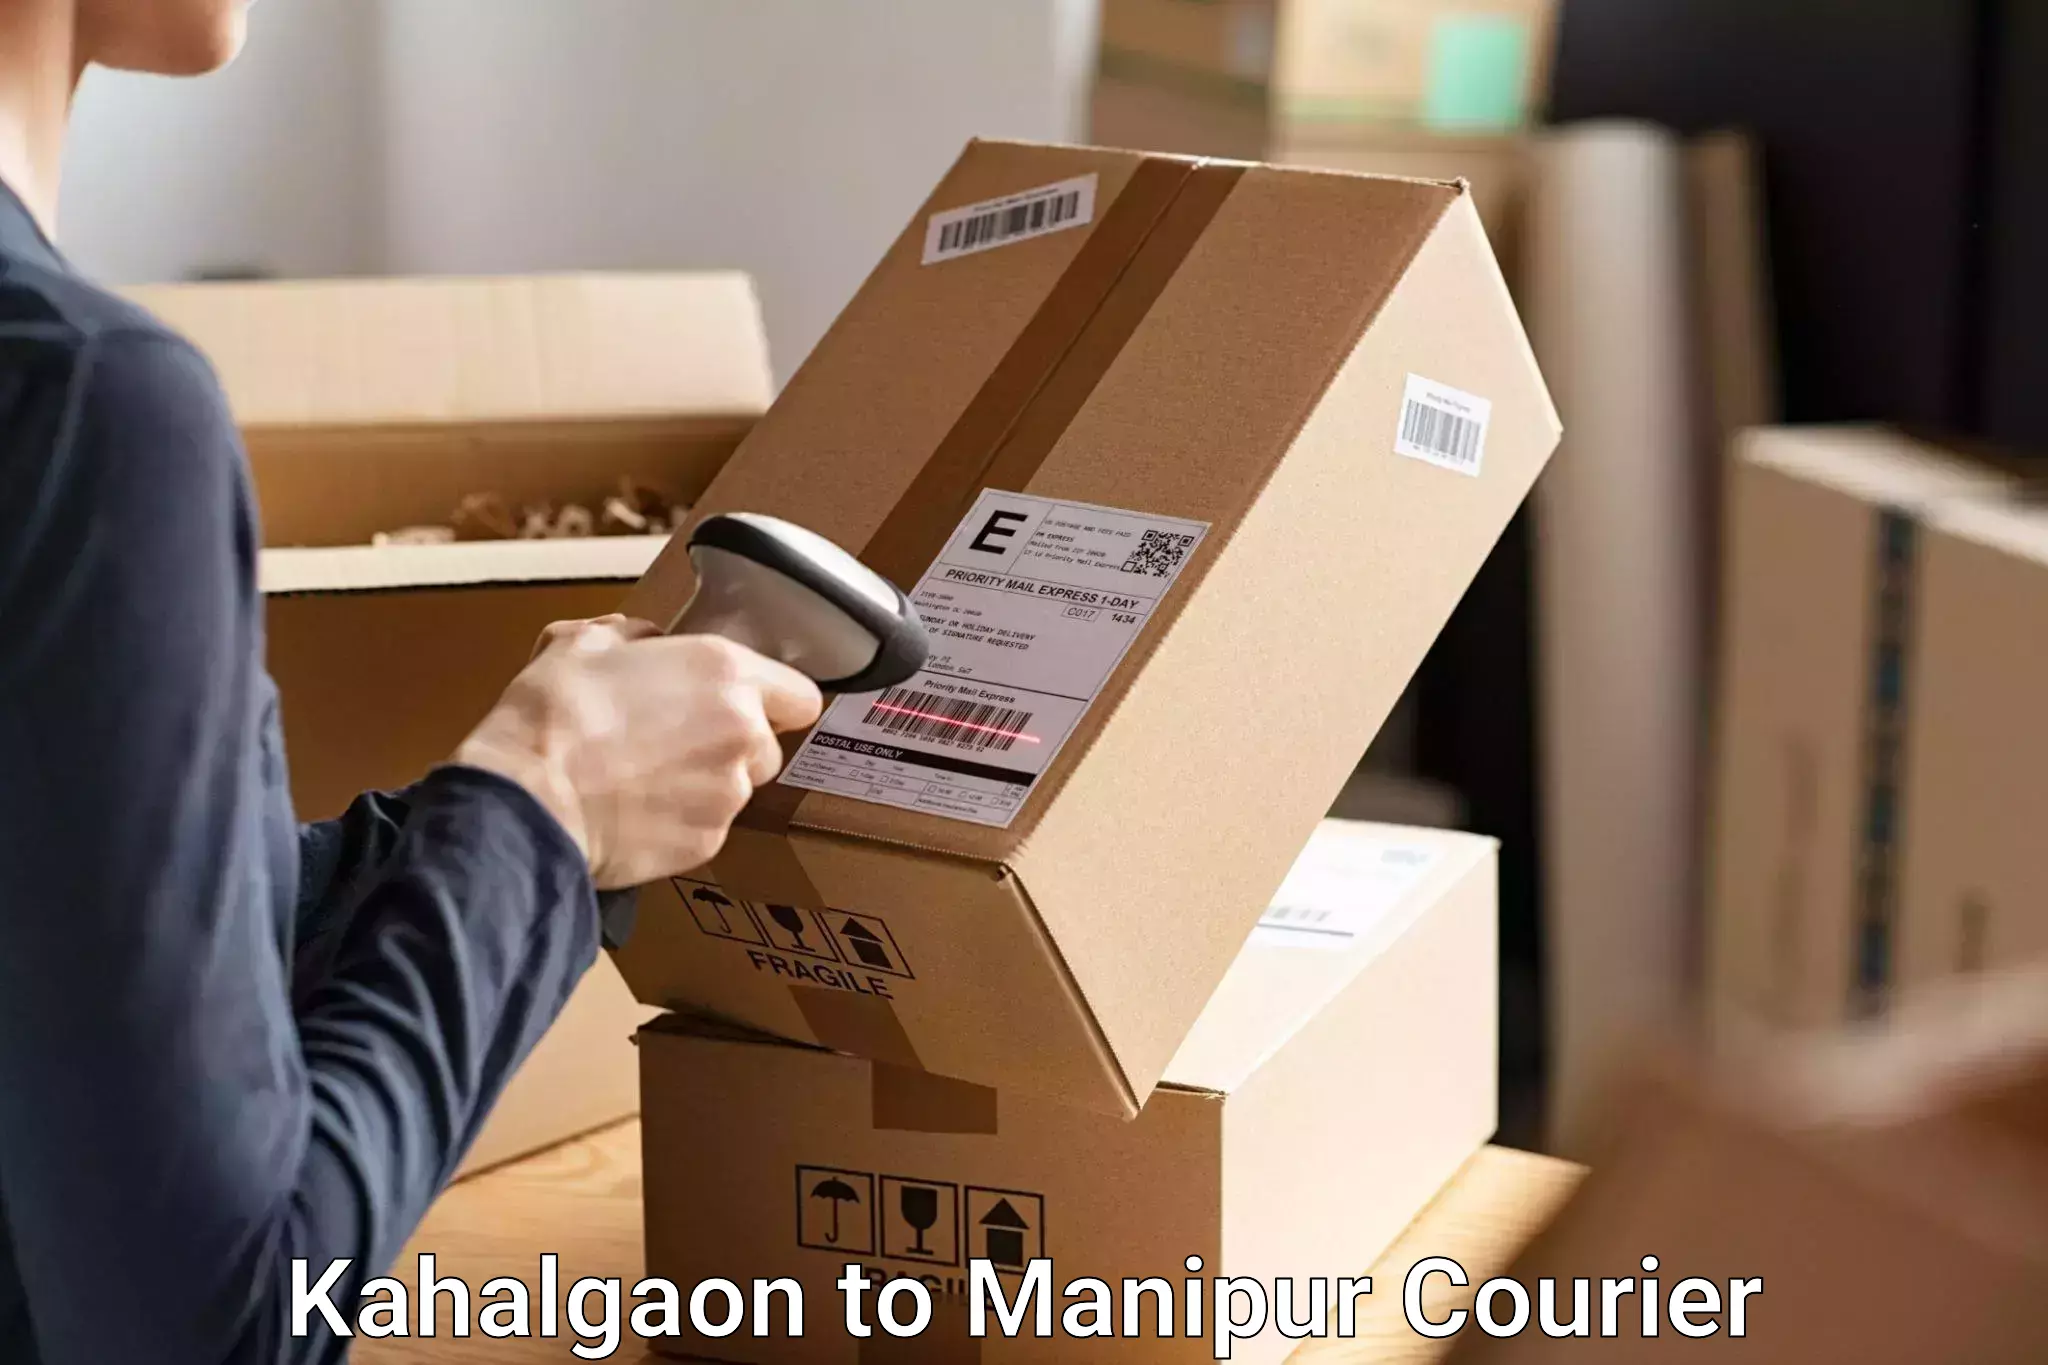 Baggage relocation service Kahalgaon to Manipur